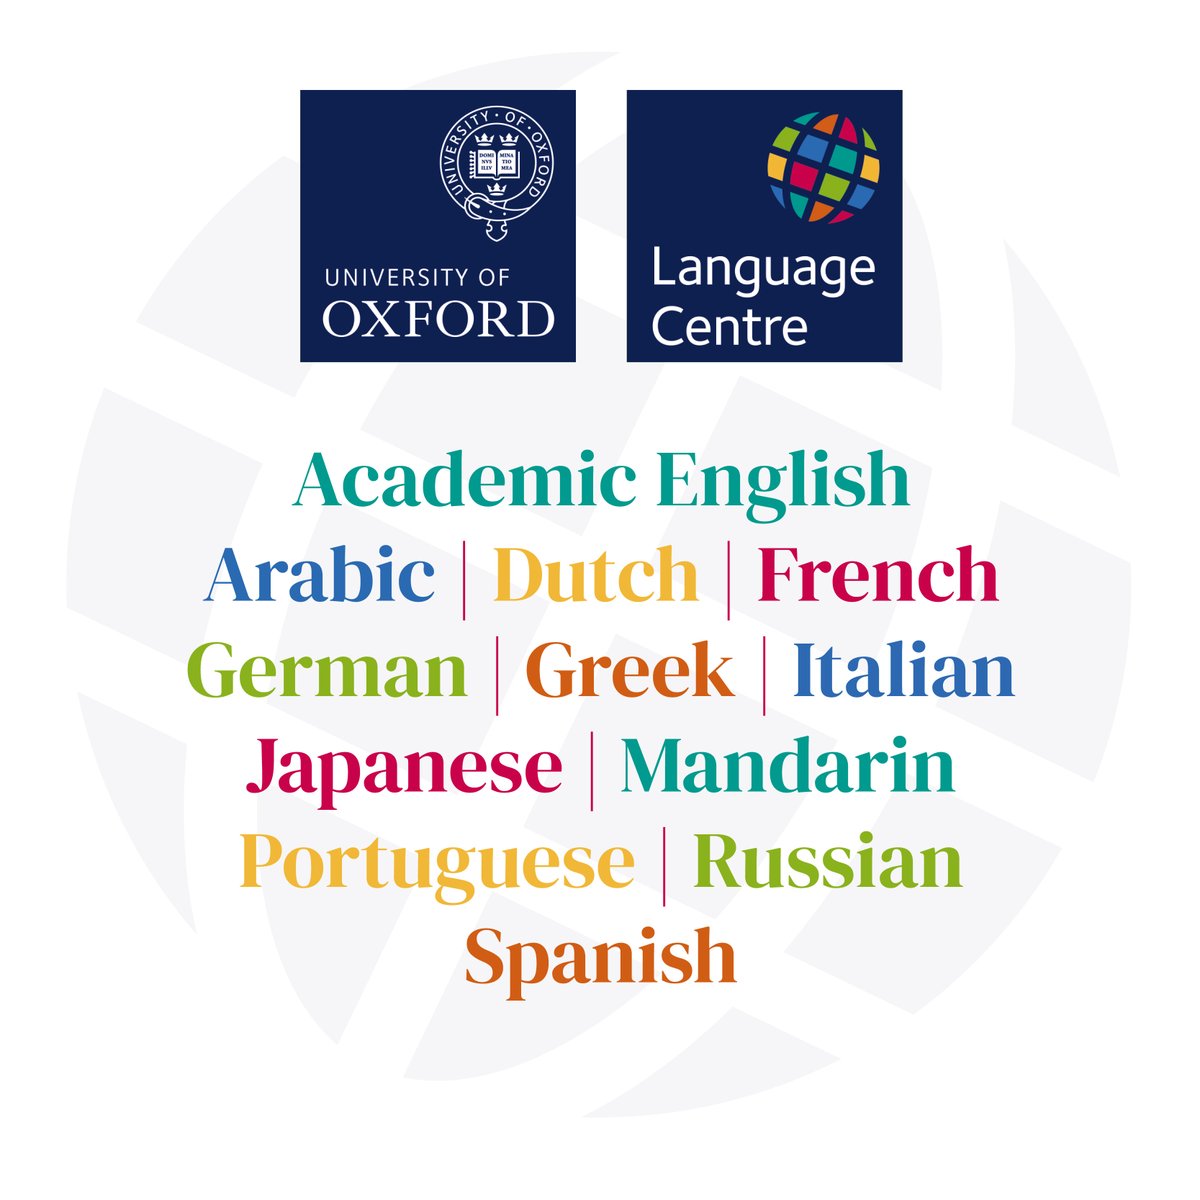 If you’re coming to #OxOpenDay today and tomorrow, be sure to drop into the Language Centre! Our tutors are here to answer your questions about learning a #language alongside your degree. How to find us: lang.ox.ac.uk/contact-or-vis… #OxOpenDay #languagesforall #LanguageLearning